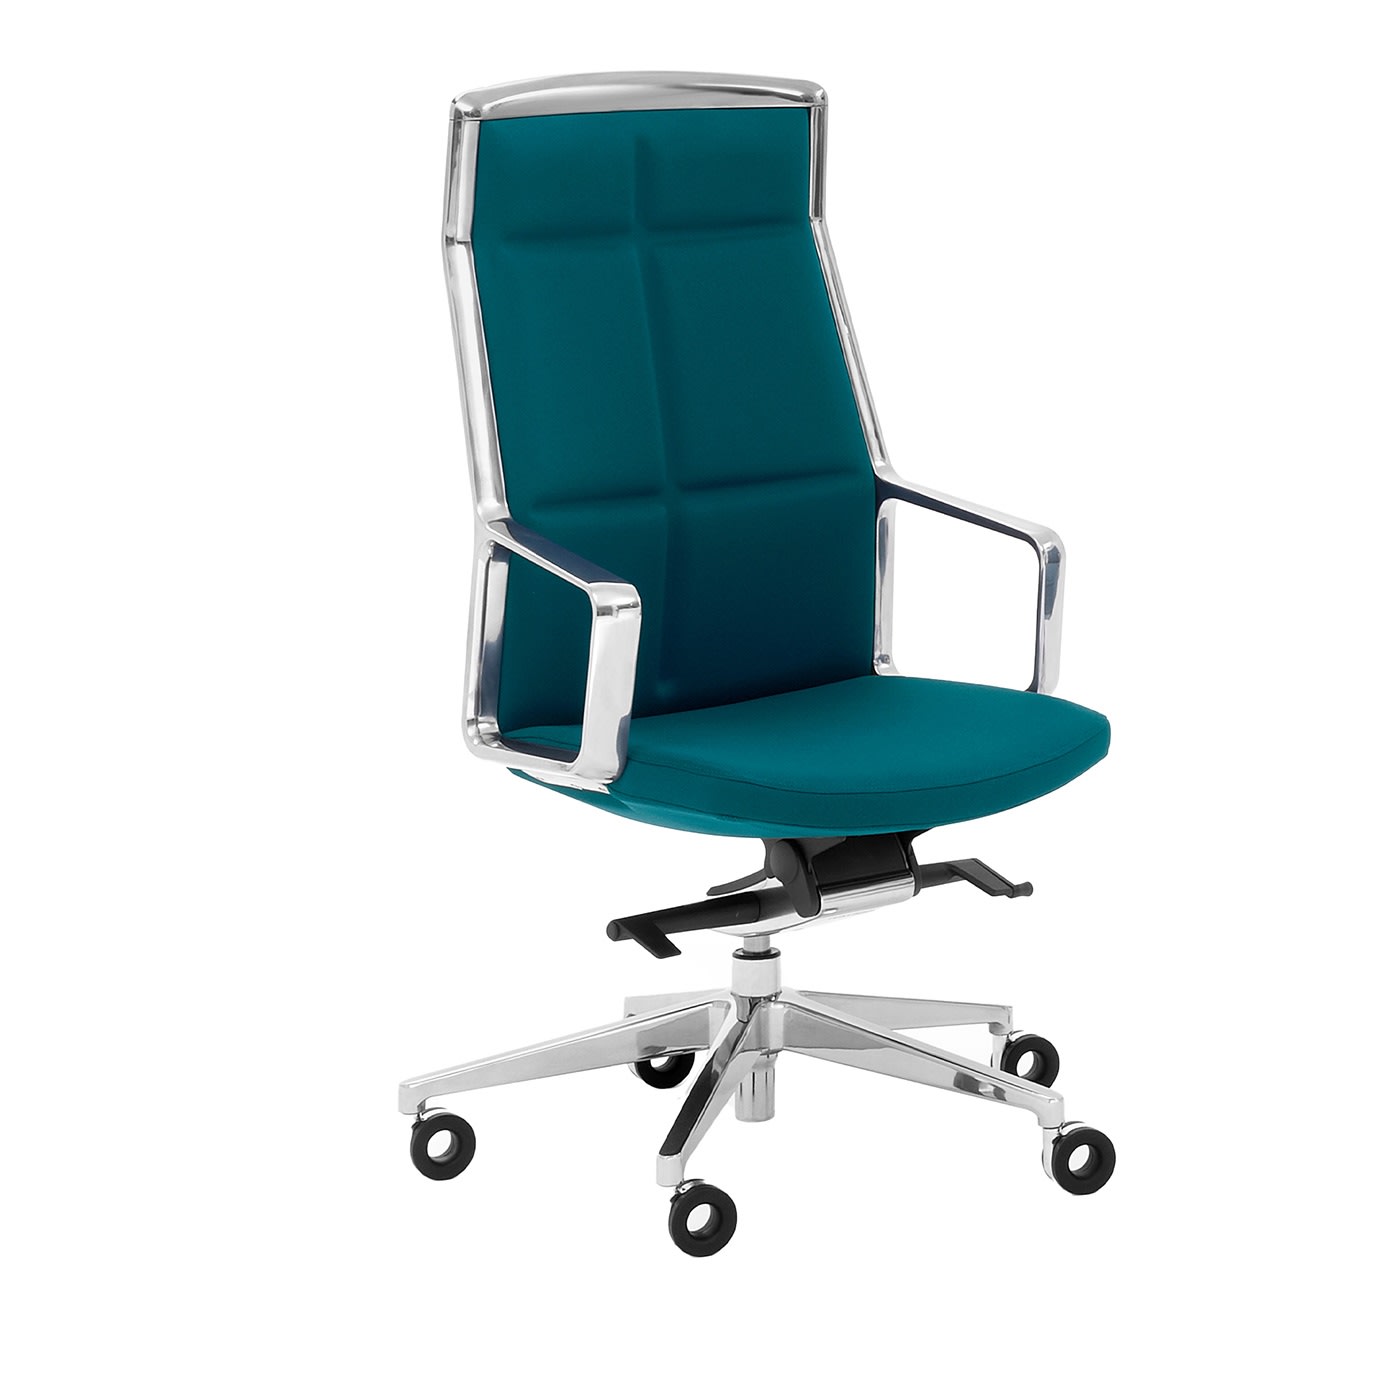 ADELE BLUE-GREEN EXECUTIVE CHAIR by ORLANDINIDESIGN - Viganò & C.